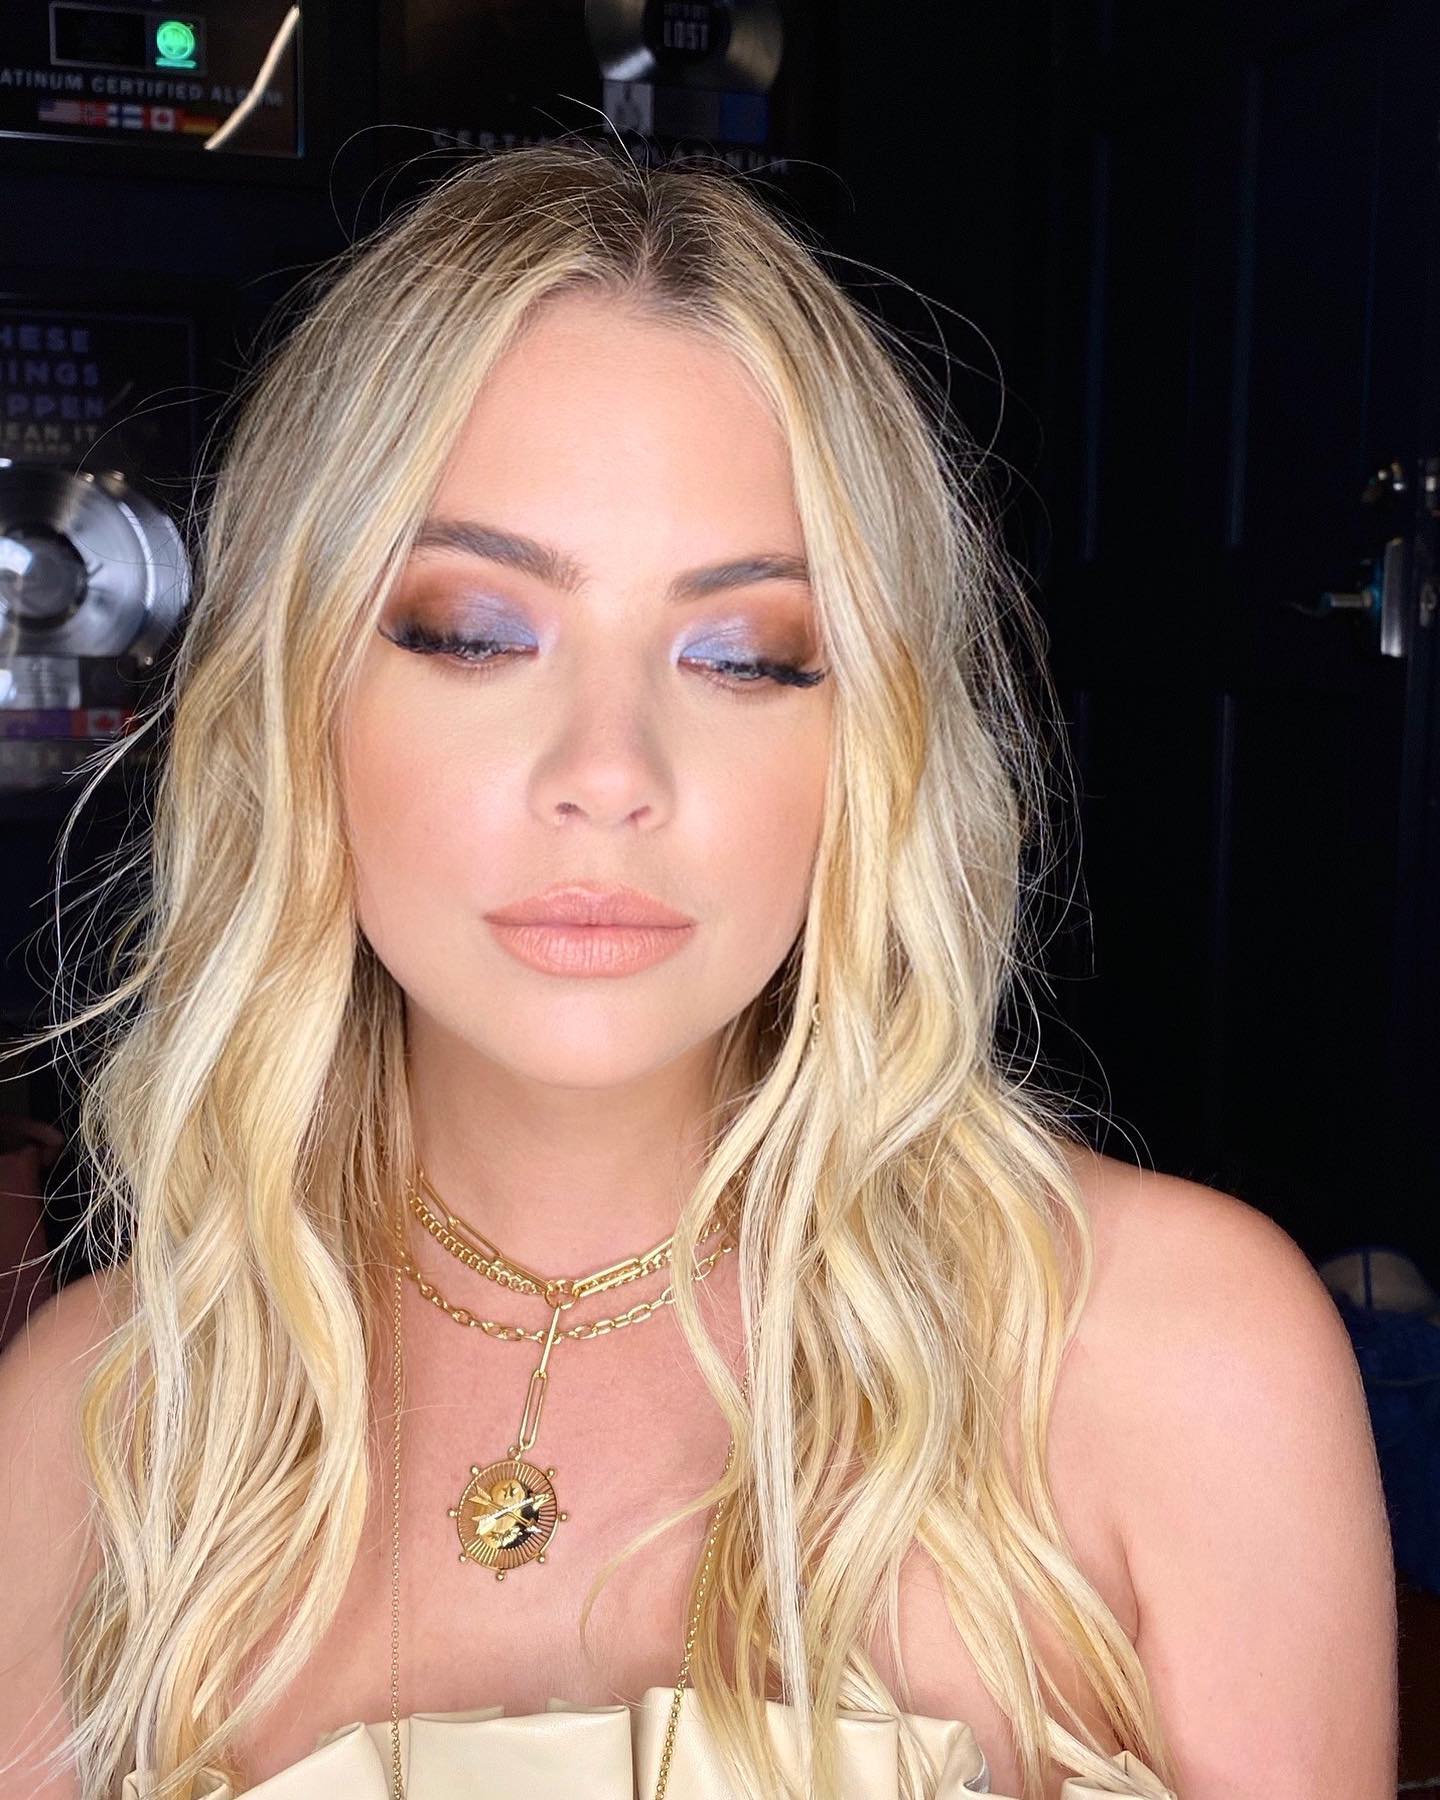 Ashley Benson Gets Ready for Prom! - Photo 1